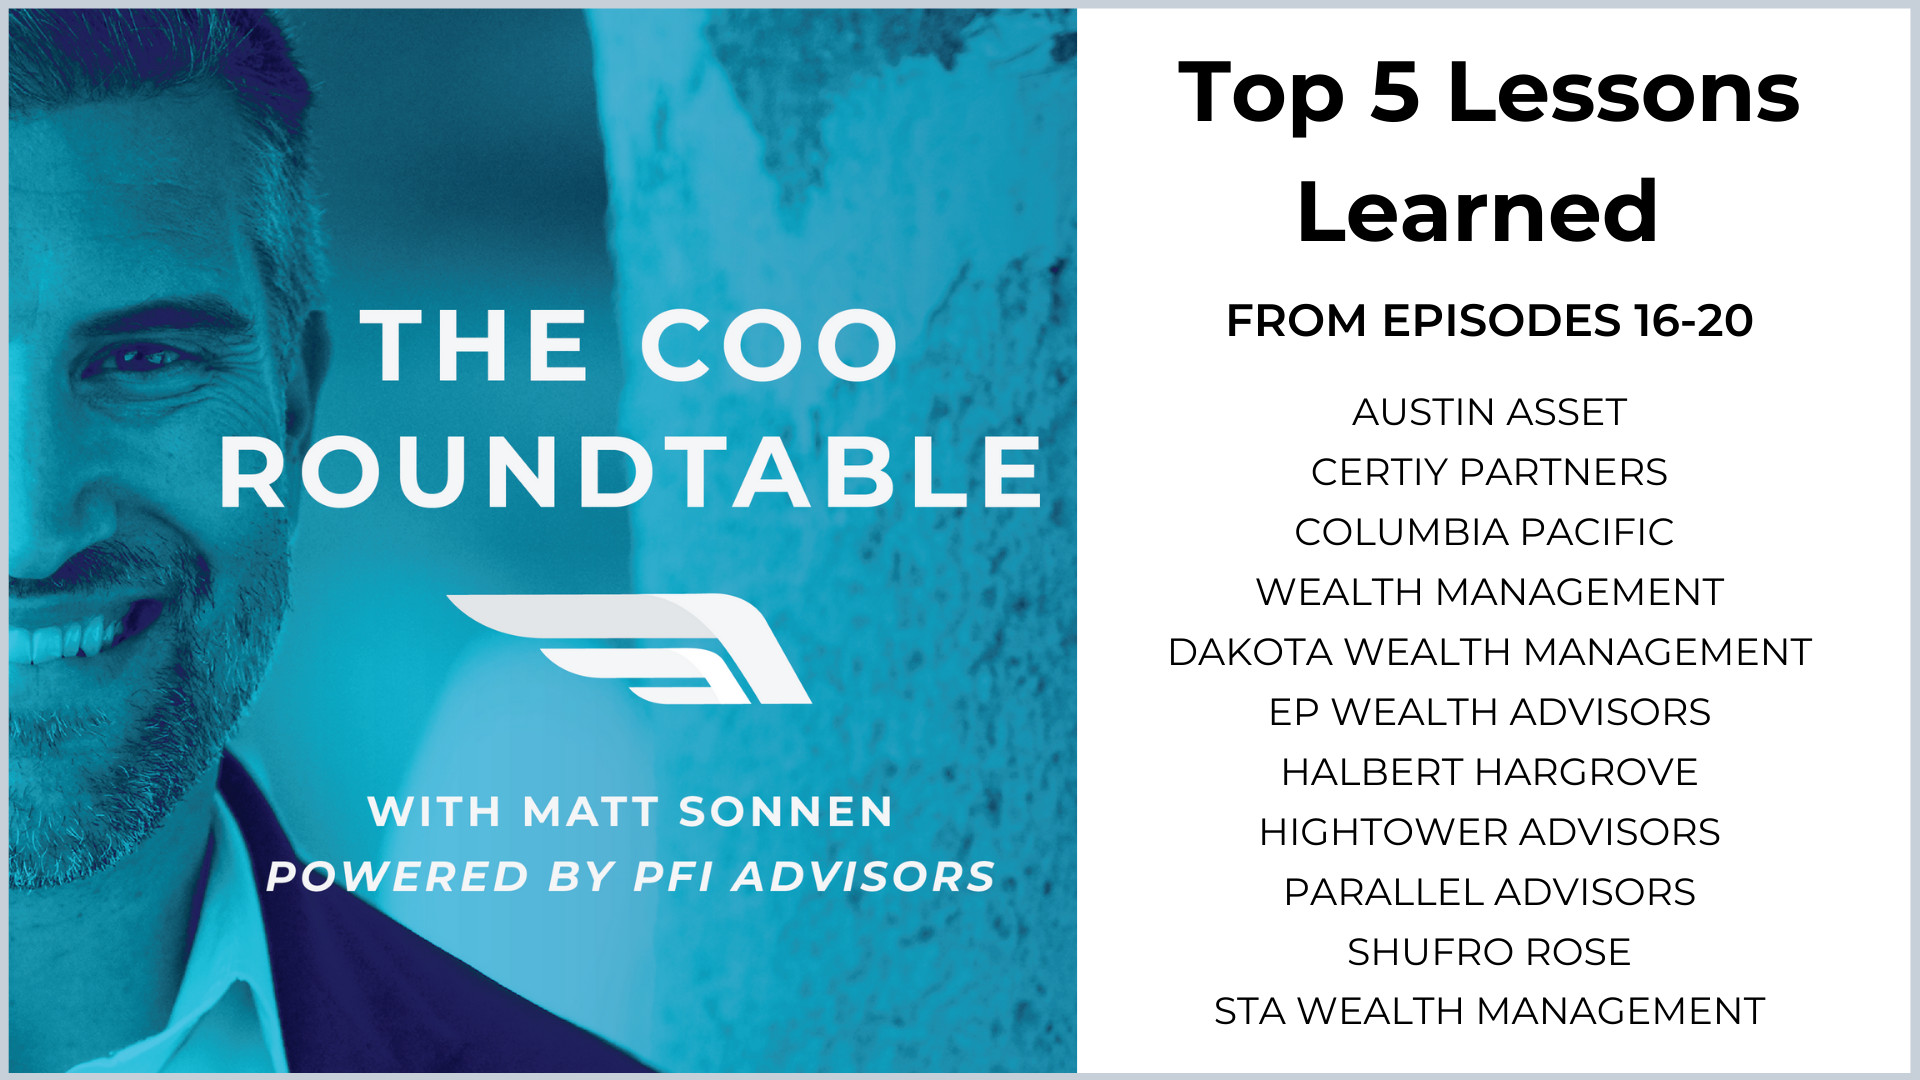 Top 5 Lessons Learned from Episodes  16-20 of The COO Roundtable